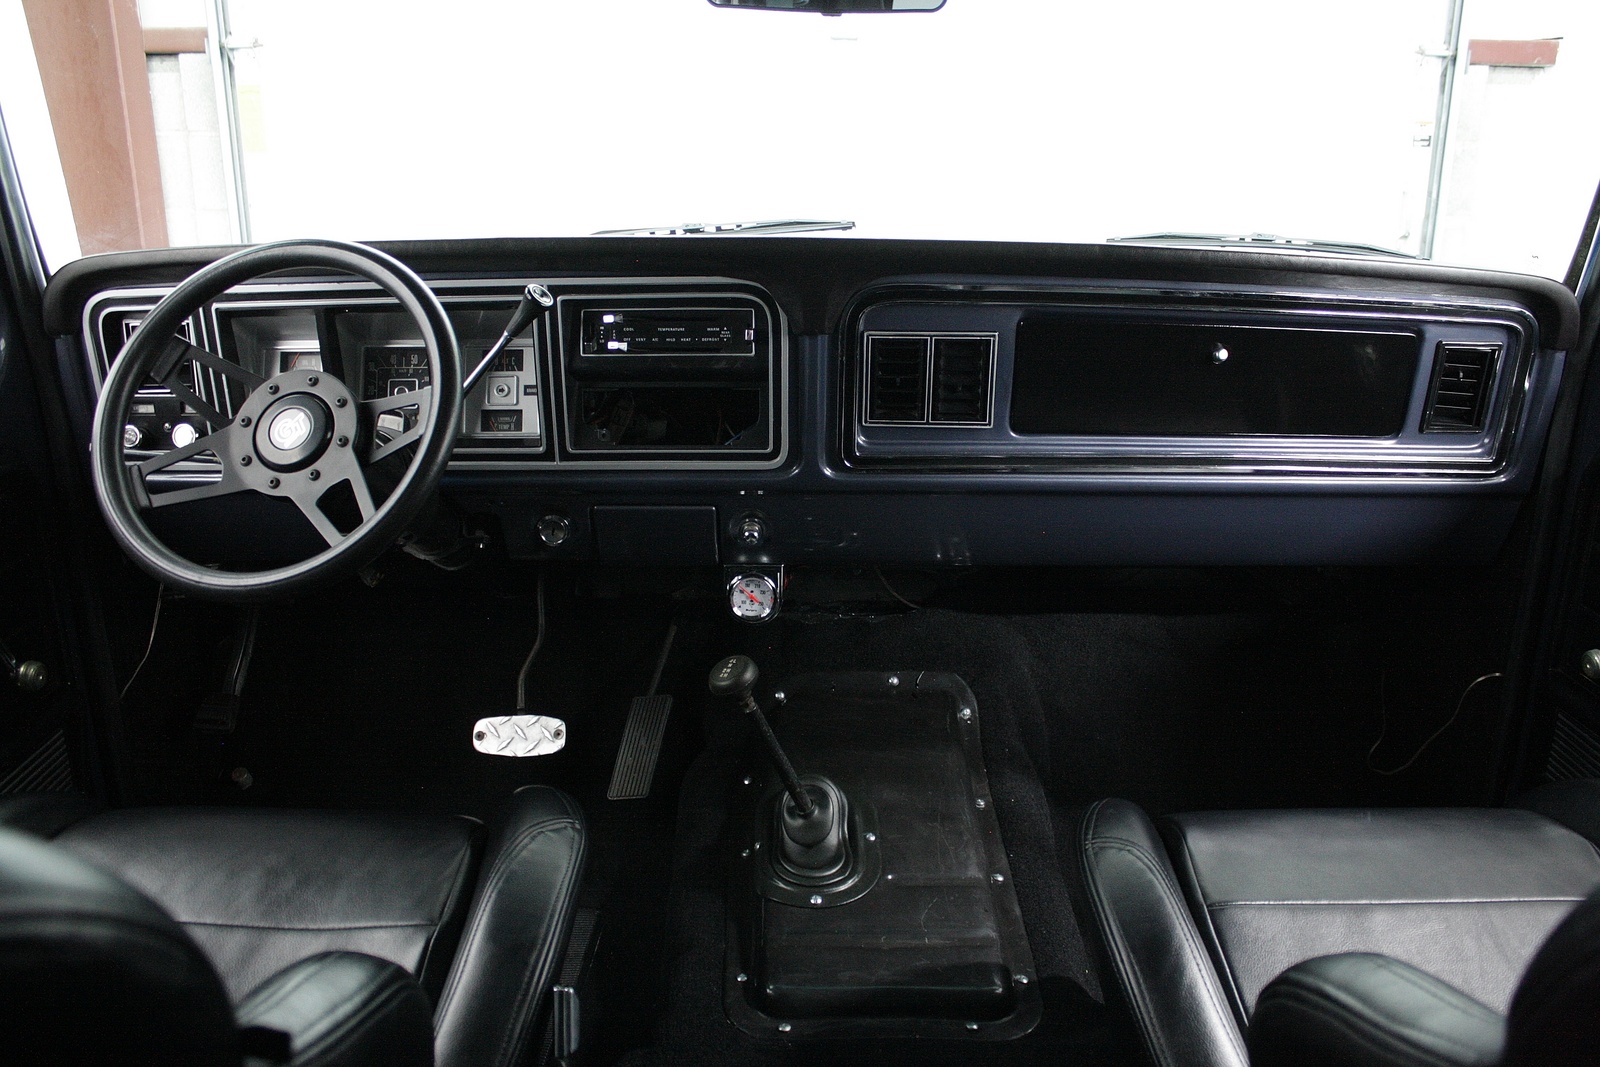 1979 Ford bronco upholstery #1